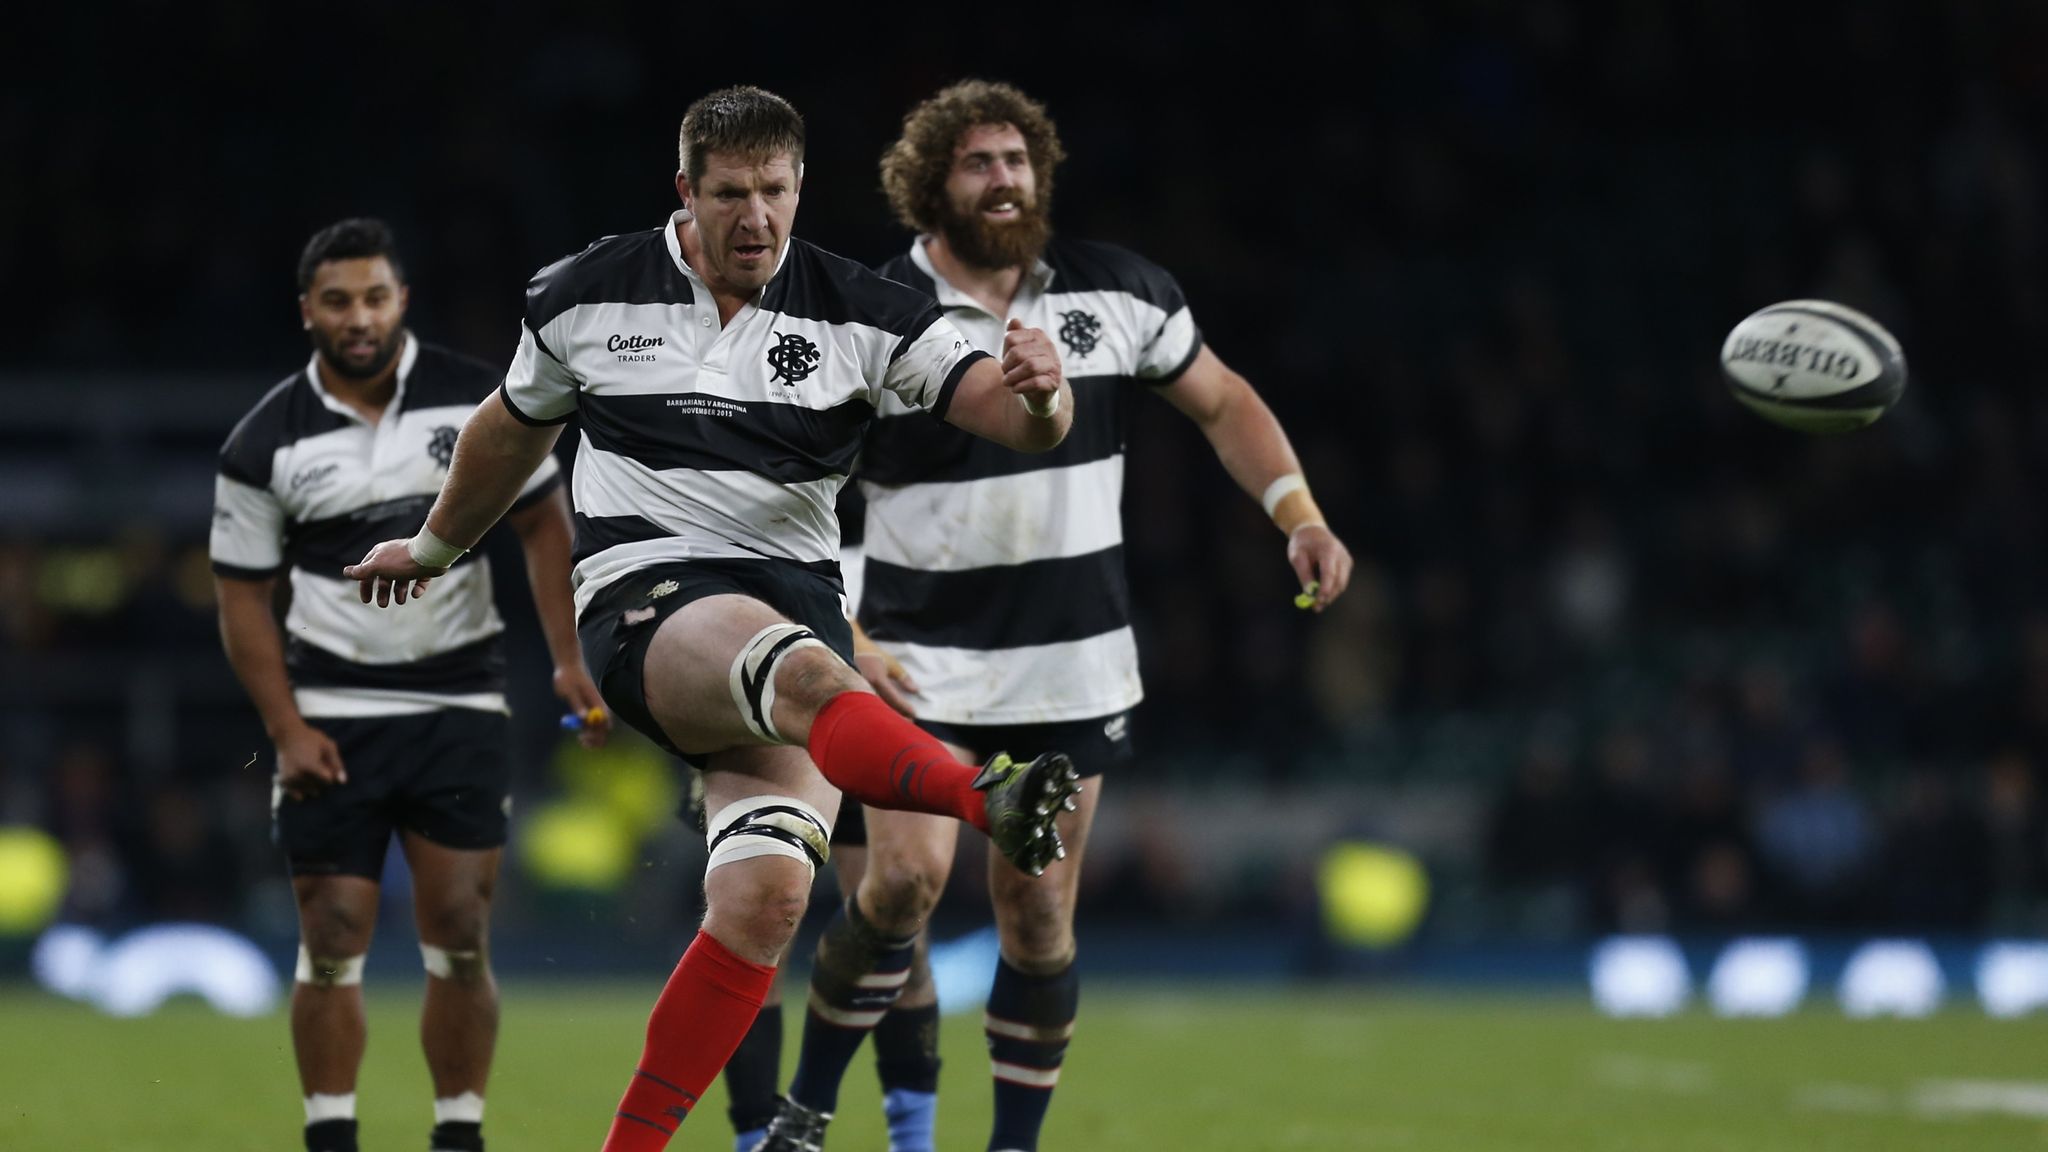 WATCH Bakkies Botha takes a conversion for the Barbarians Rugby Union News Sky Sports